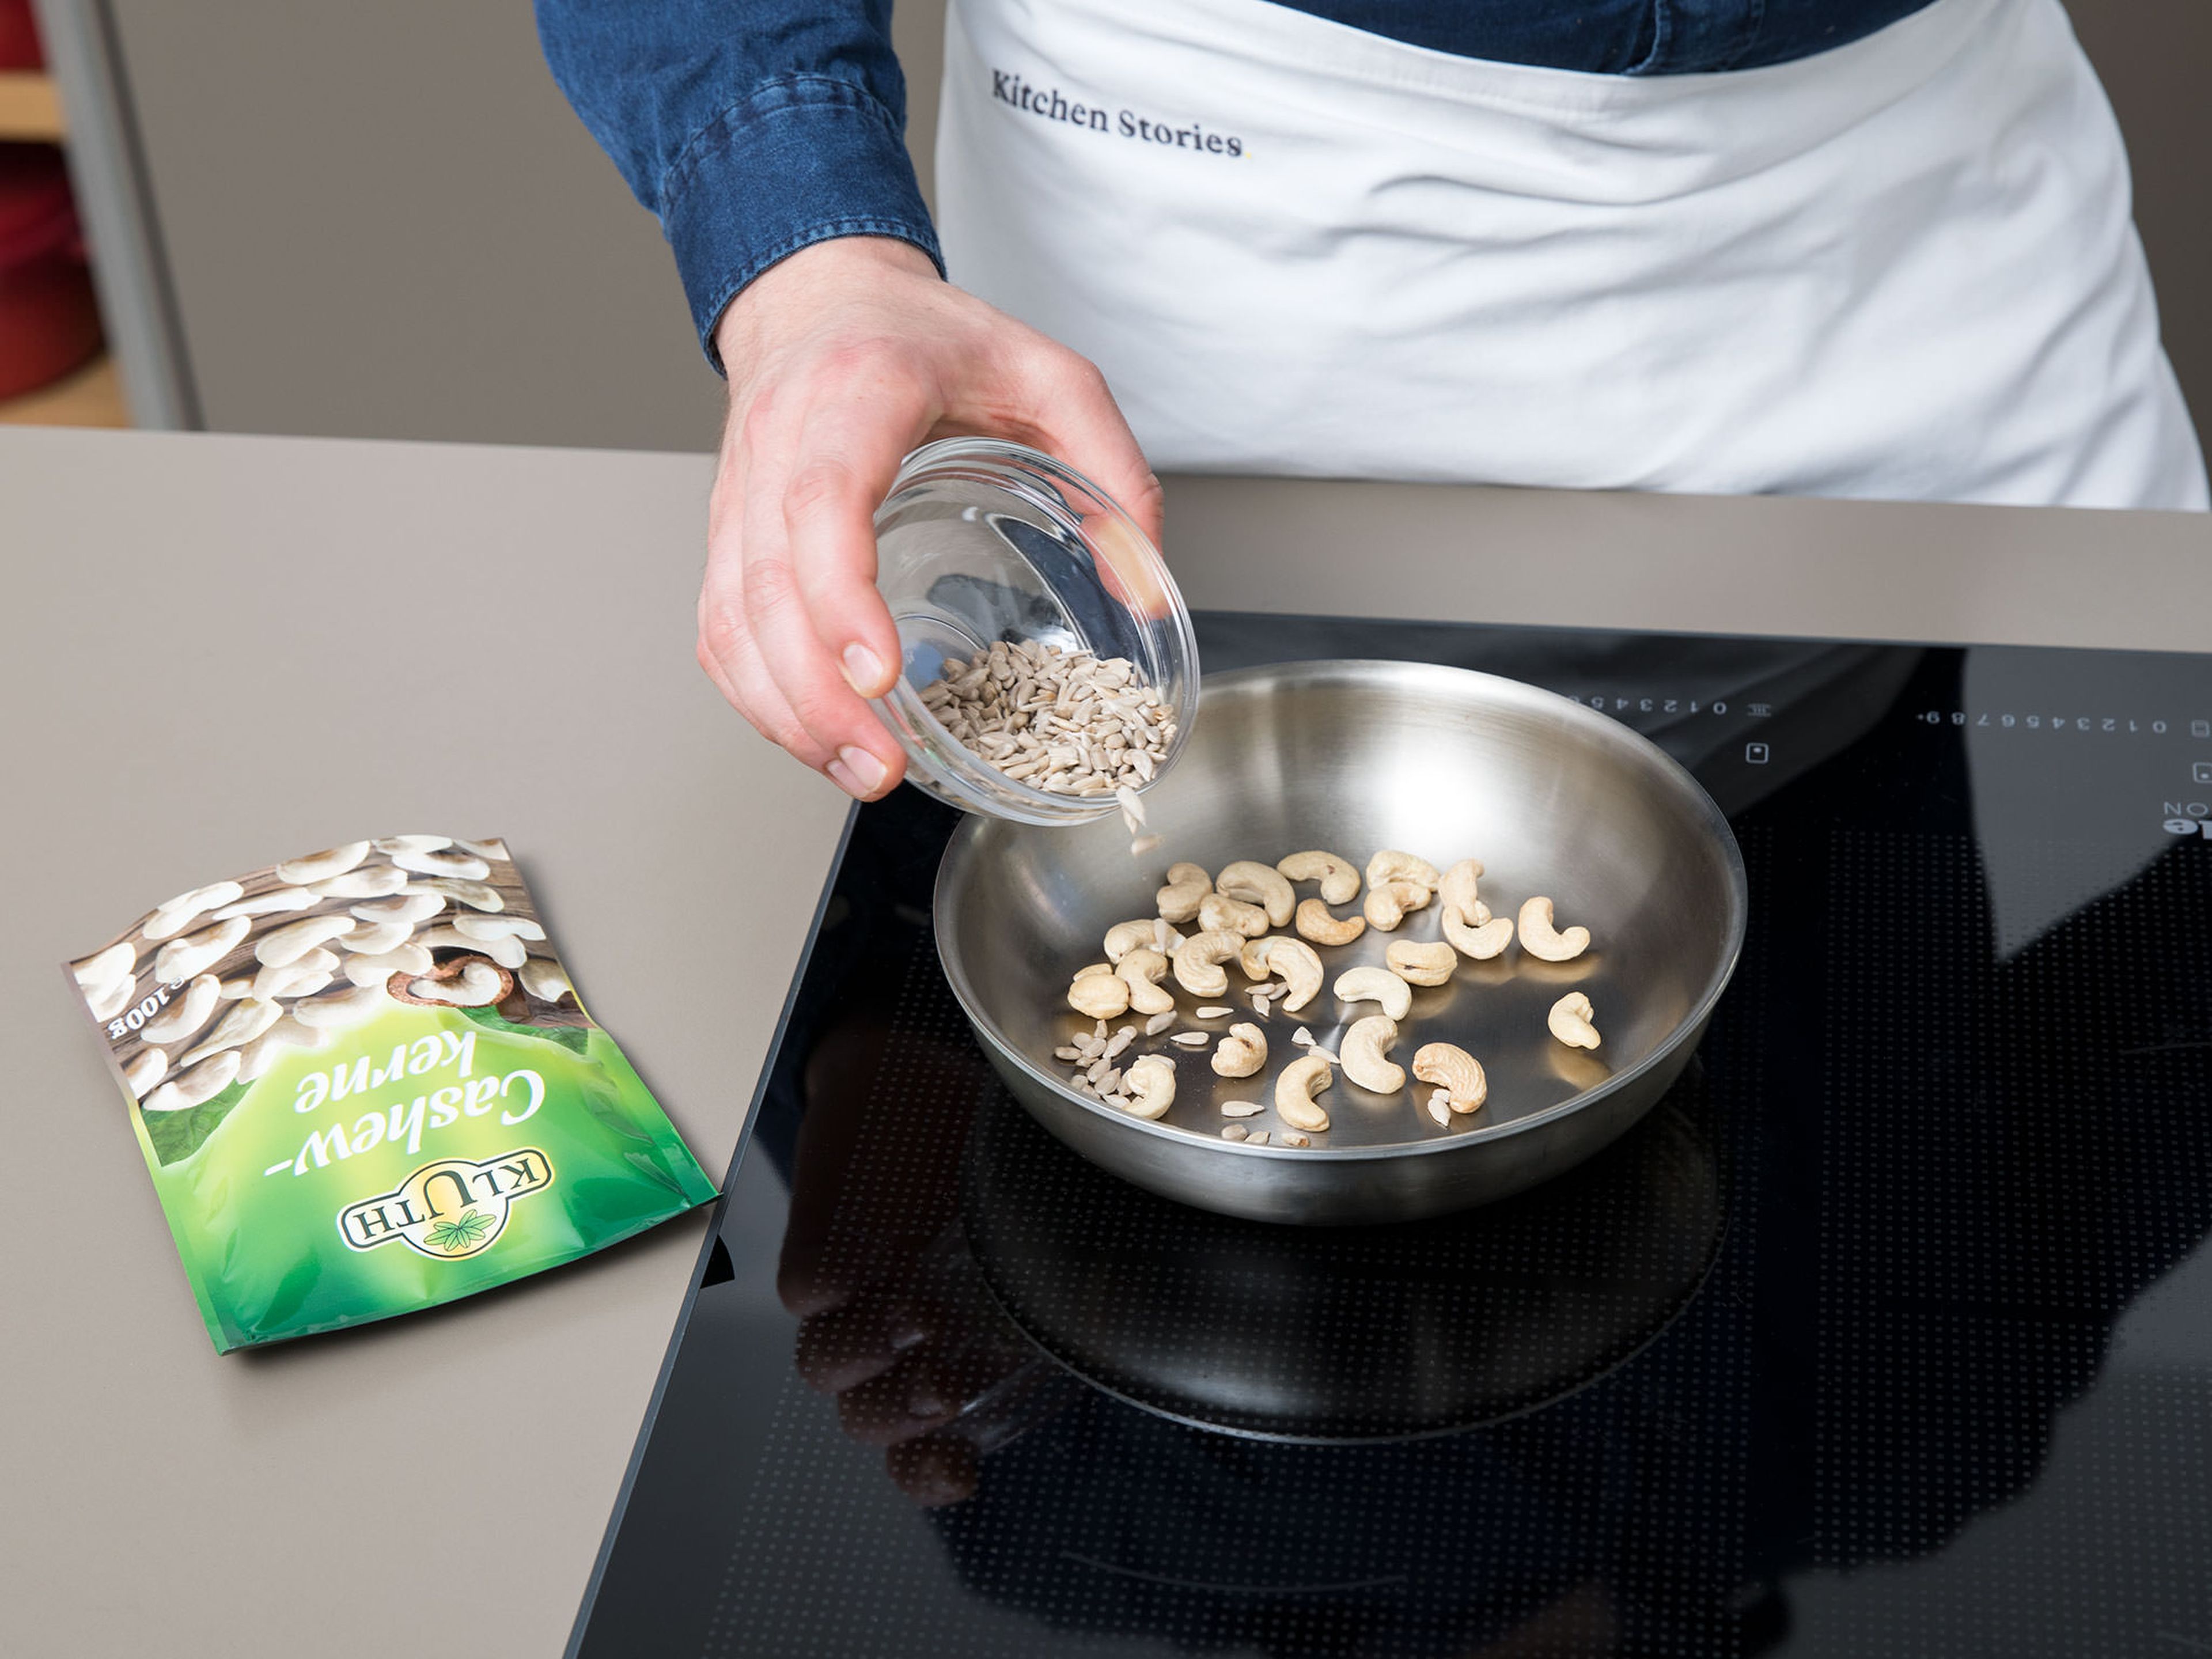 Heat a frying pan over medium-low heat. Toast cashews and sunflower seeds until fragrant and lightly browned, tossing often to avoid burning.